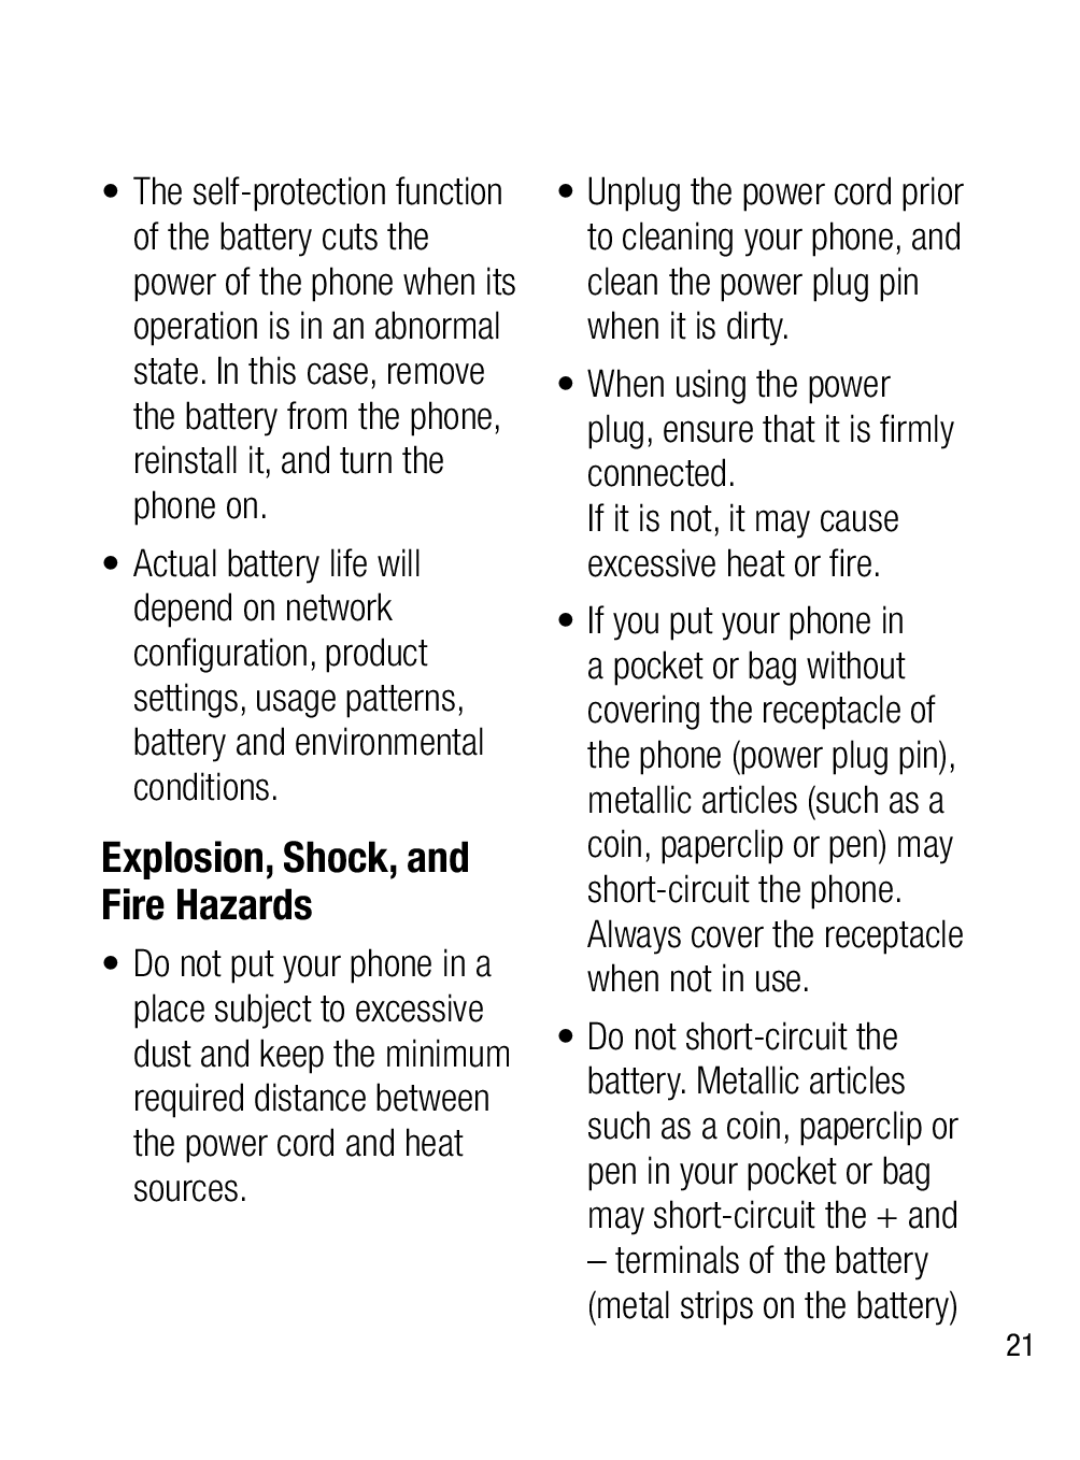 LG Electronics A133CH Explosion, Shock, and Fire Hazards, When using the power plug, ensure that it is ﬁ rmly connected 